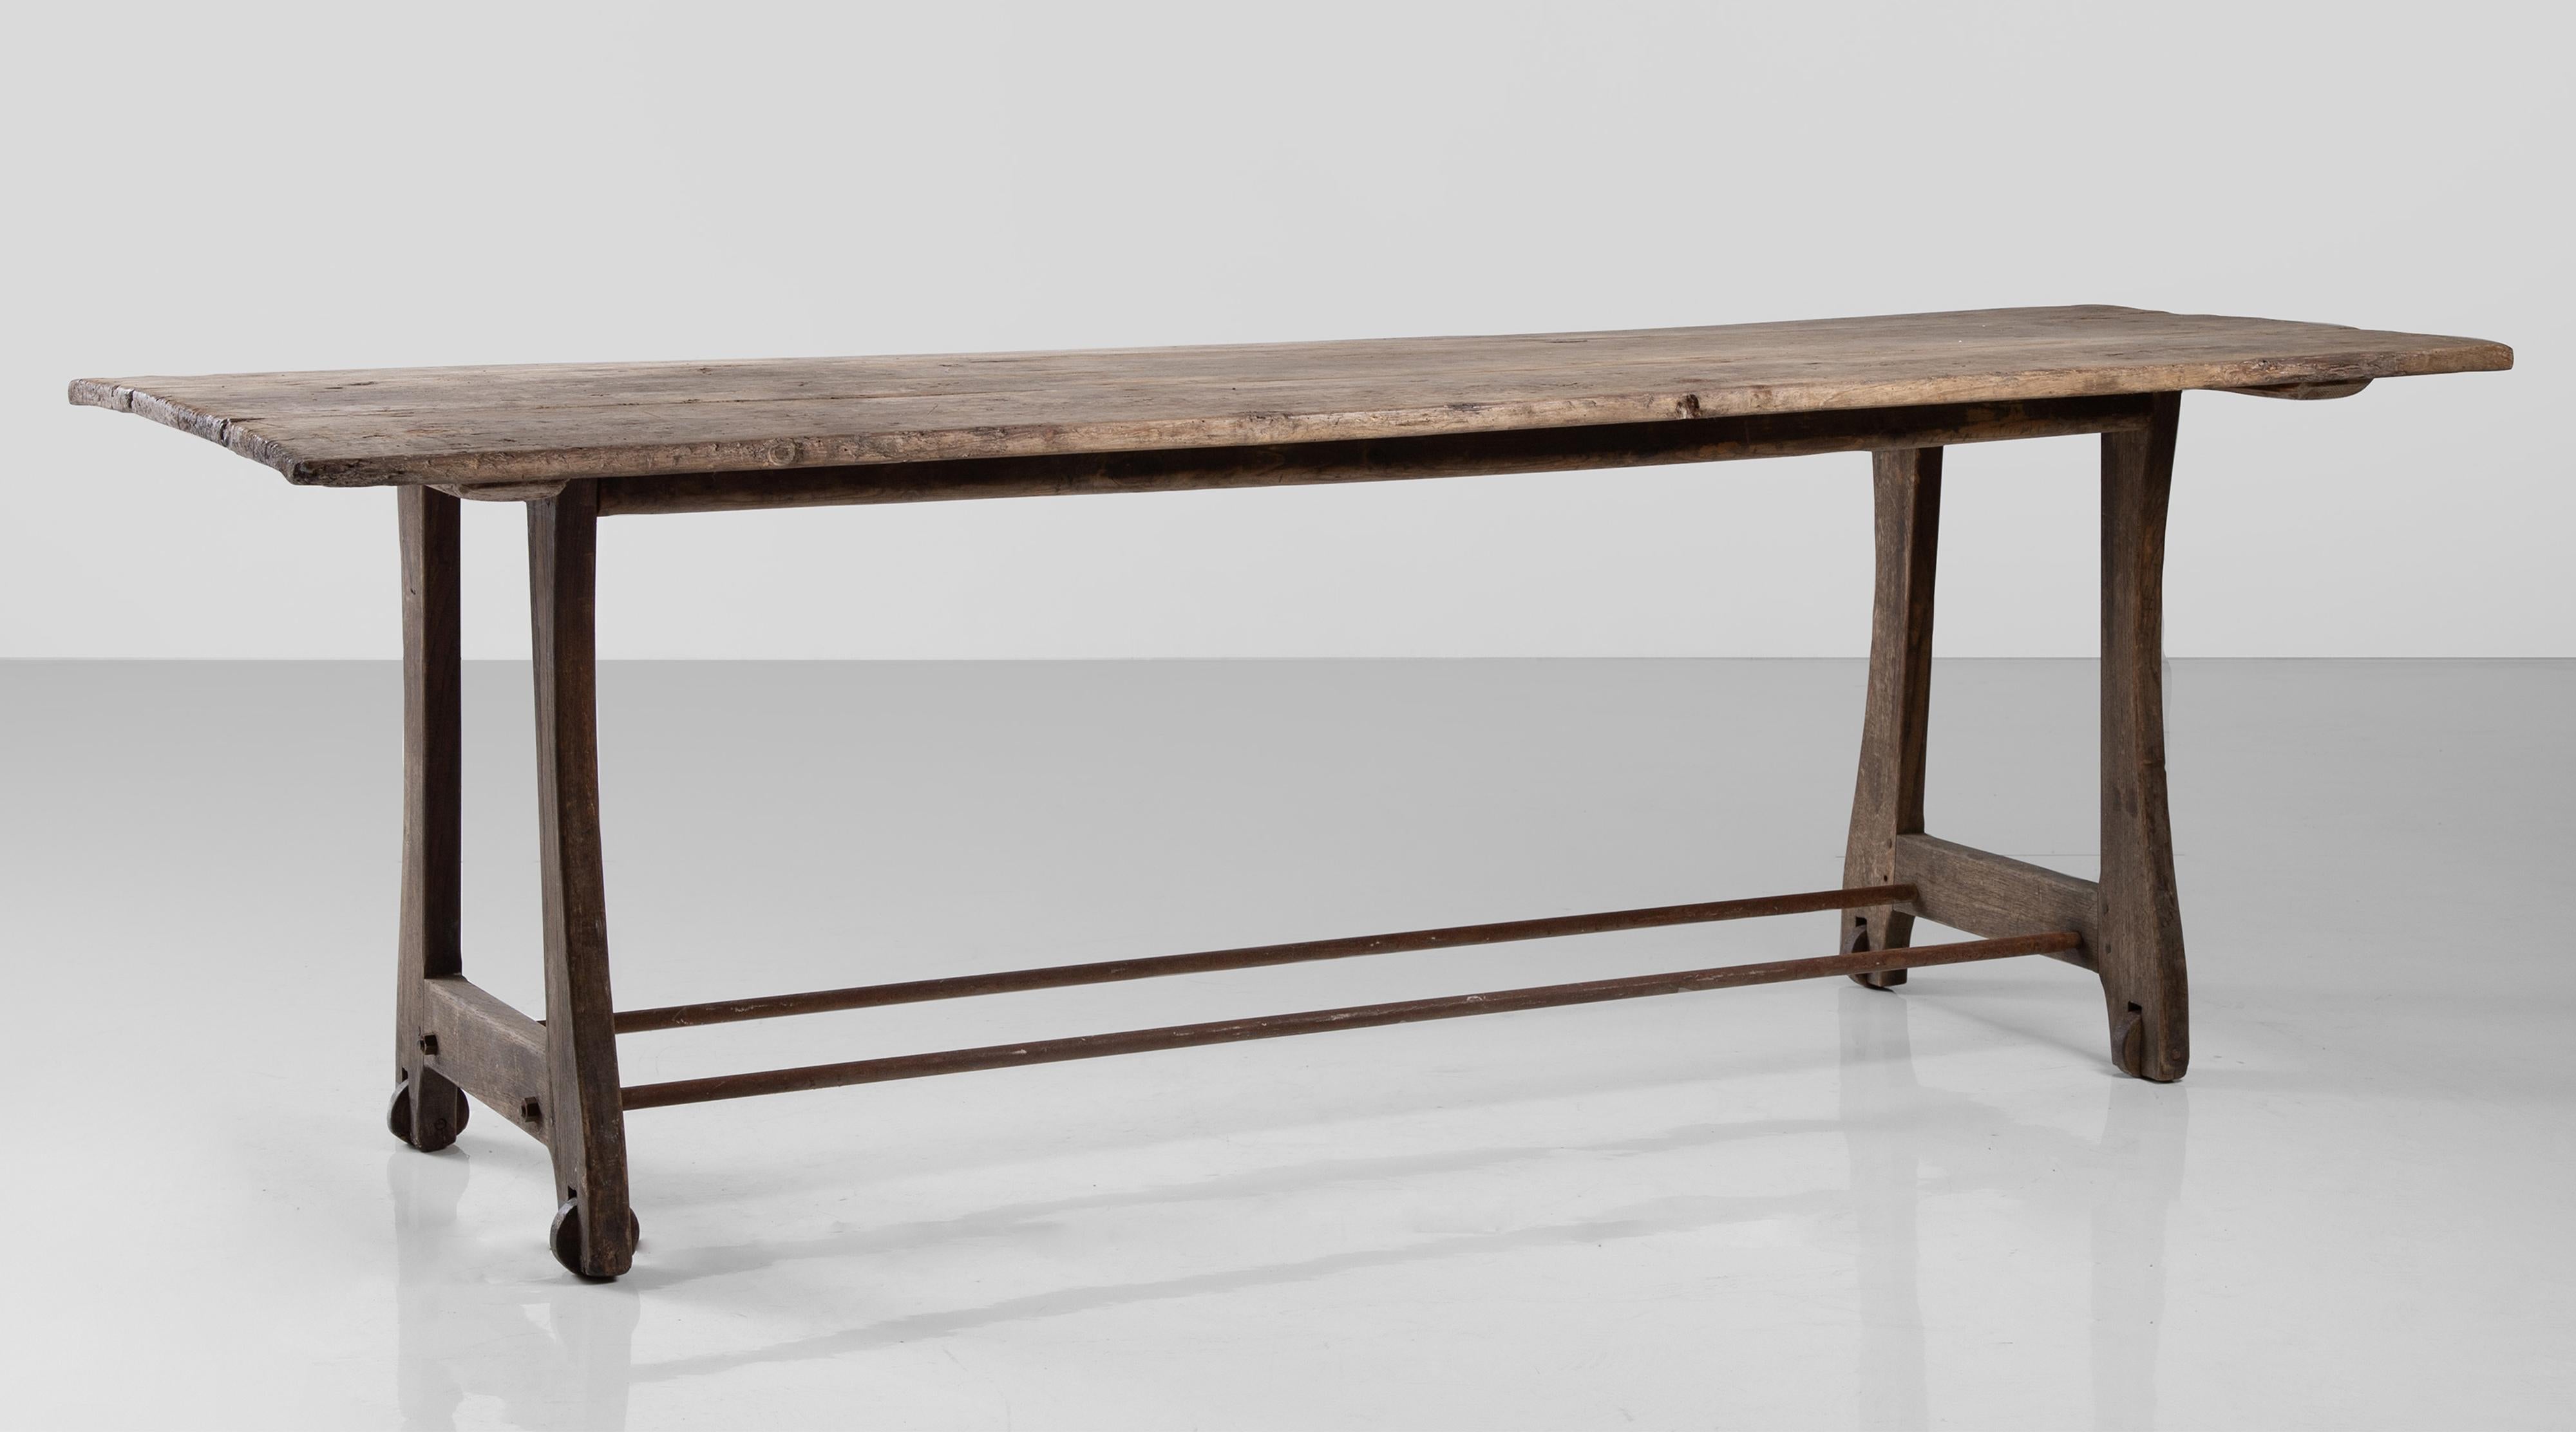 Unique work table with wooden wheels.
France circa 1900.
Plank top oak table / console with iron stretchers.
Measures: 89” W x 31.5” D x 29.75” H.
 